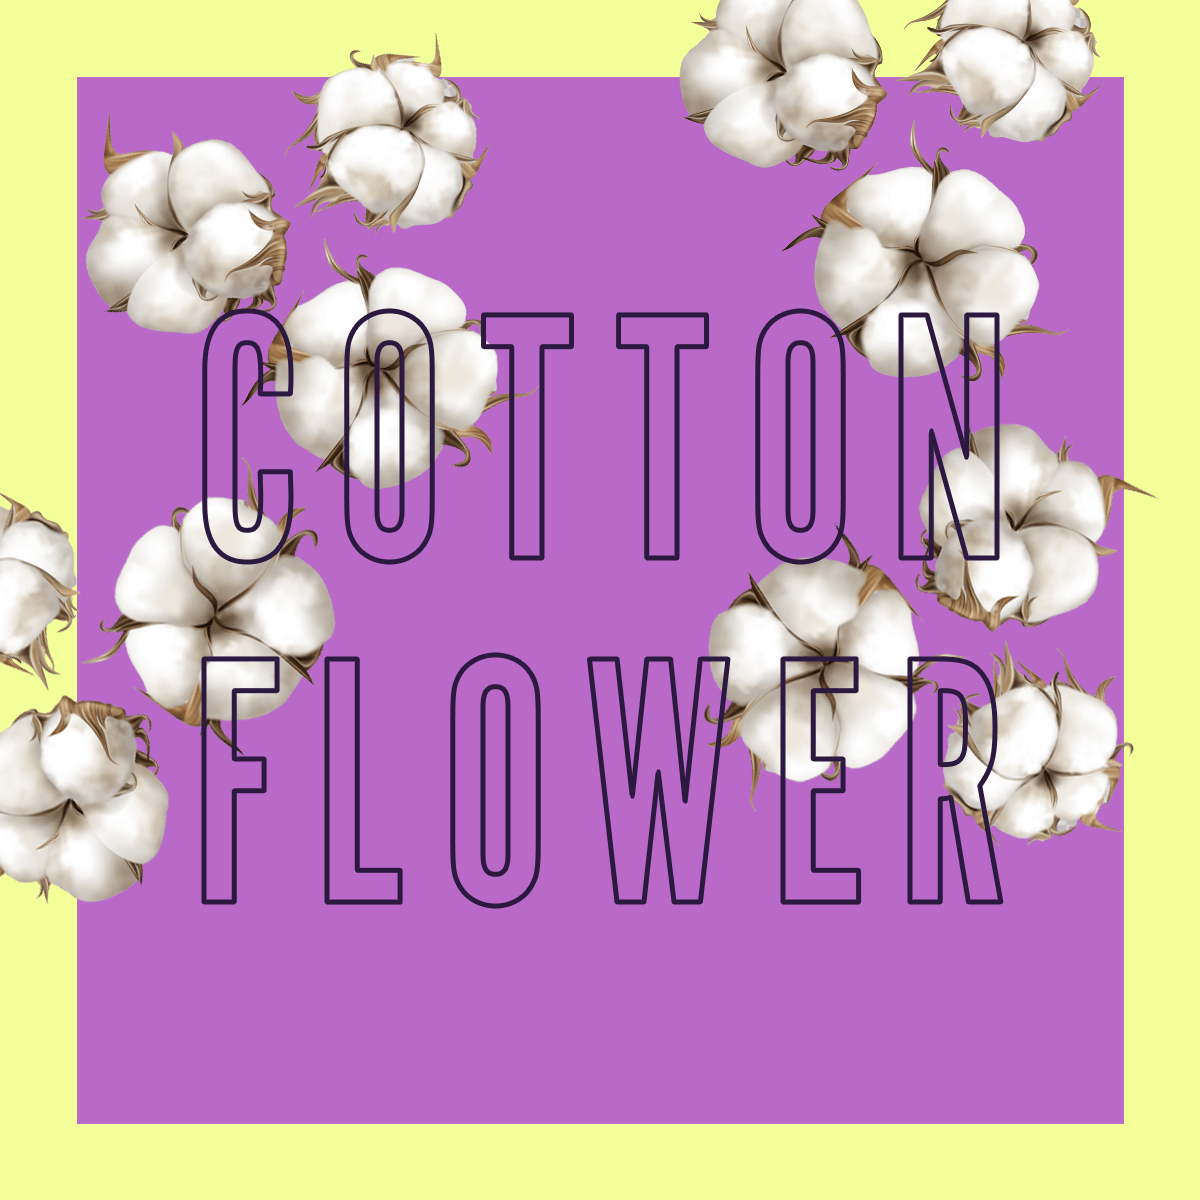 Limited Edition Cotton Flower Fragrance 10ml